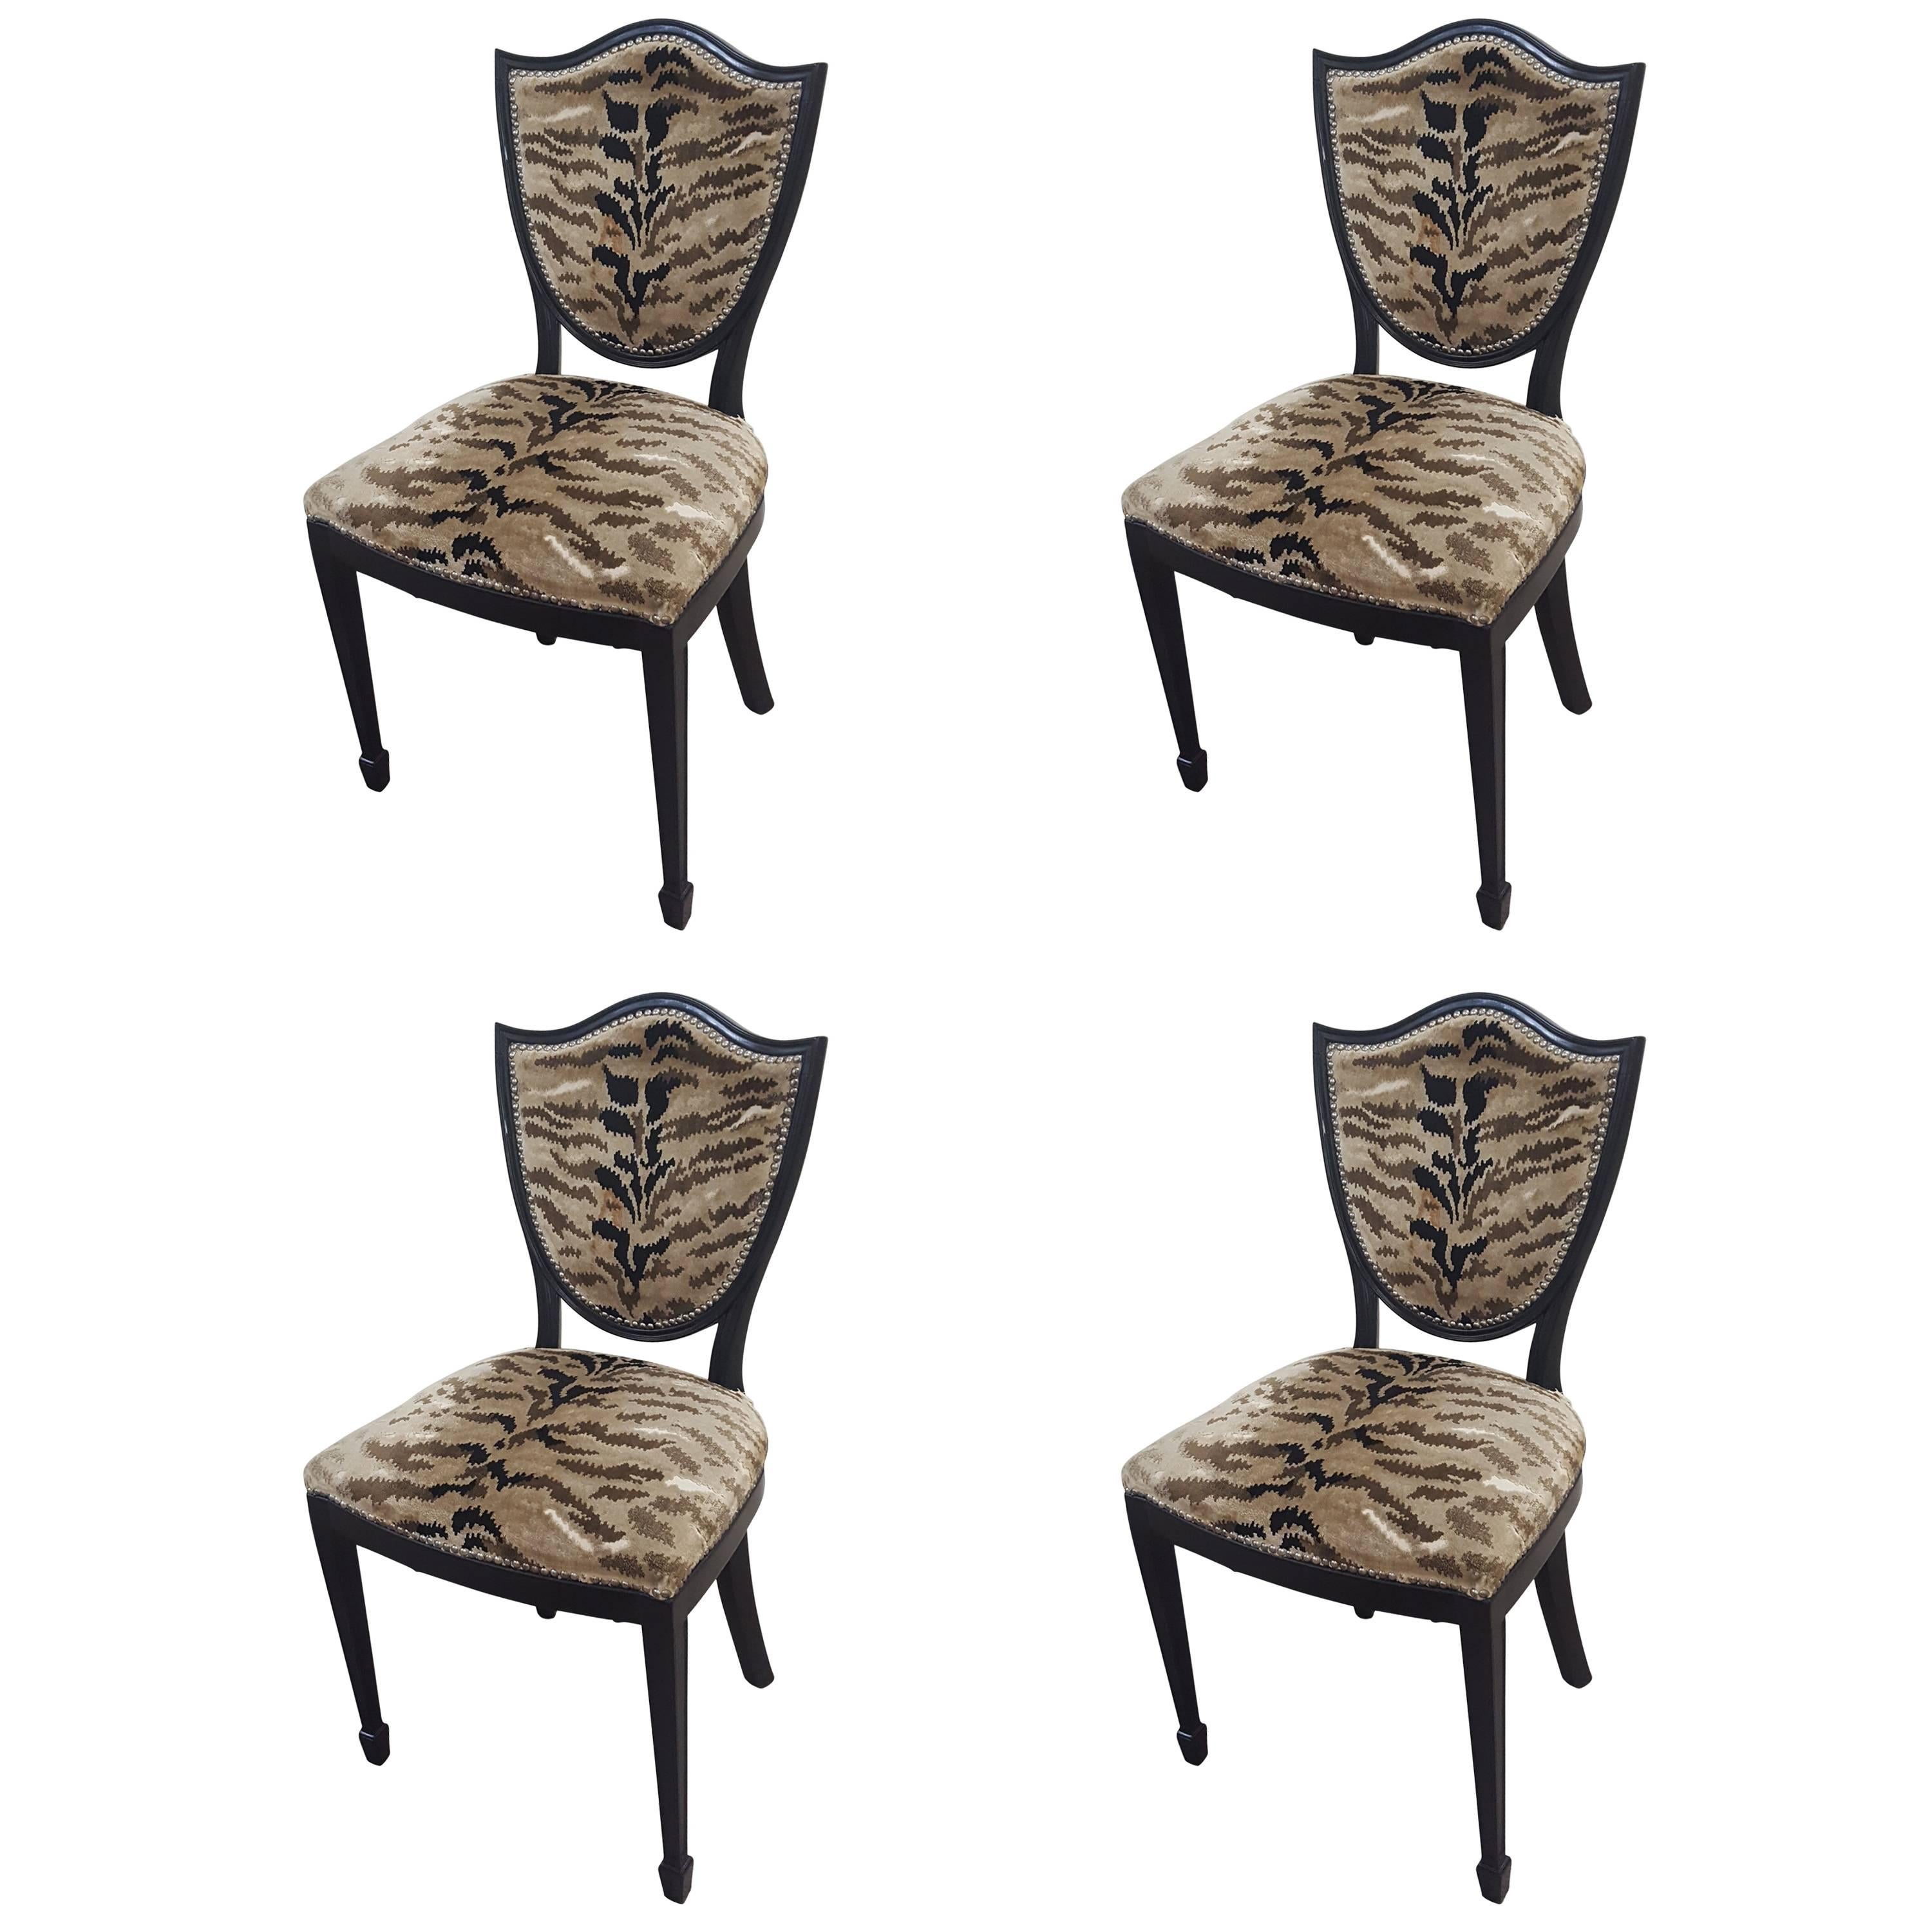 Set of Four Shield-Back Chairs Upholstered in Animal Fabric